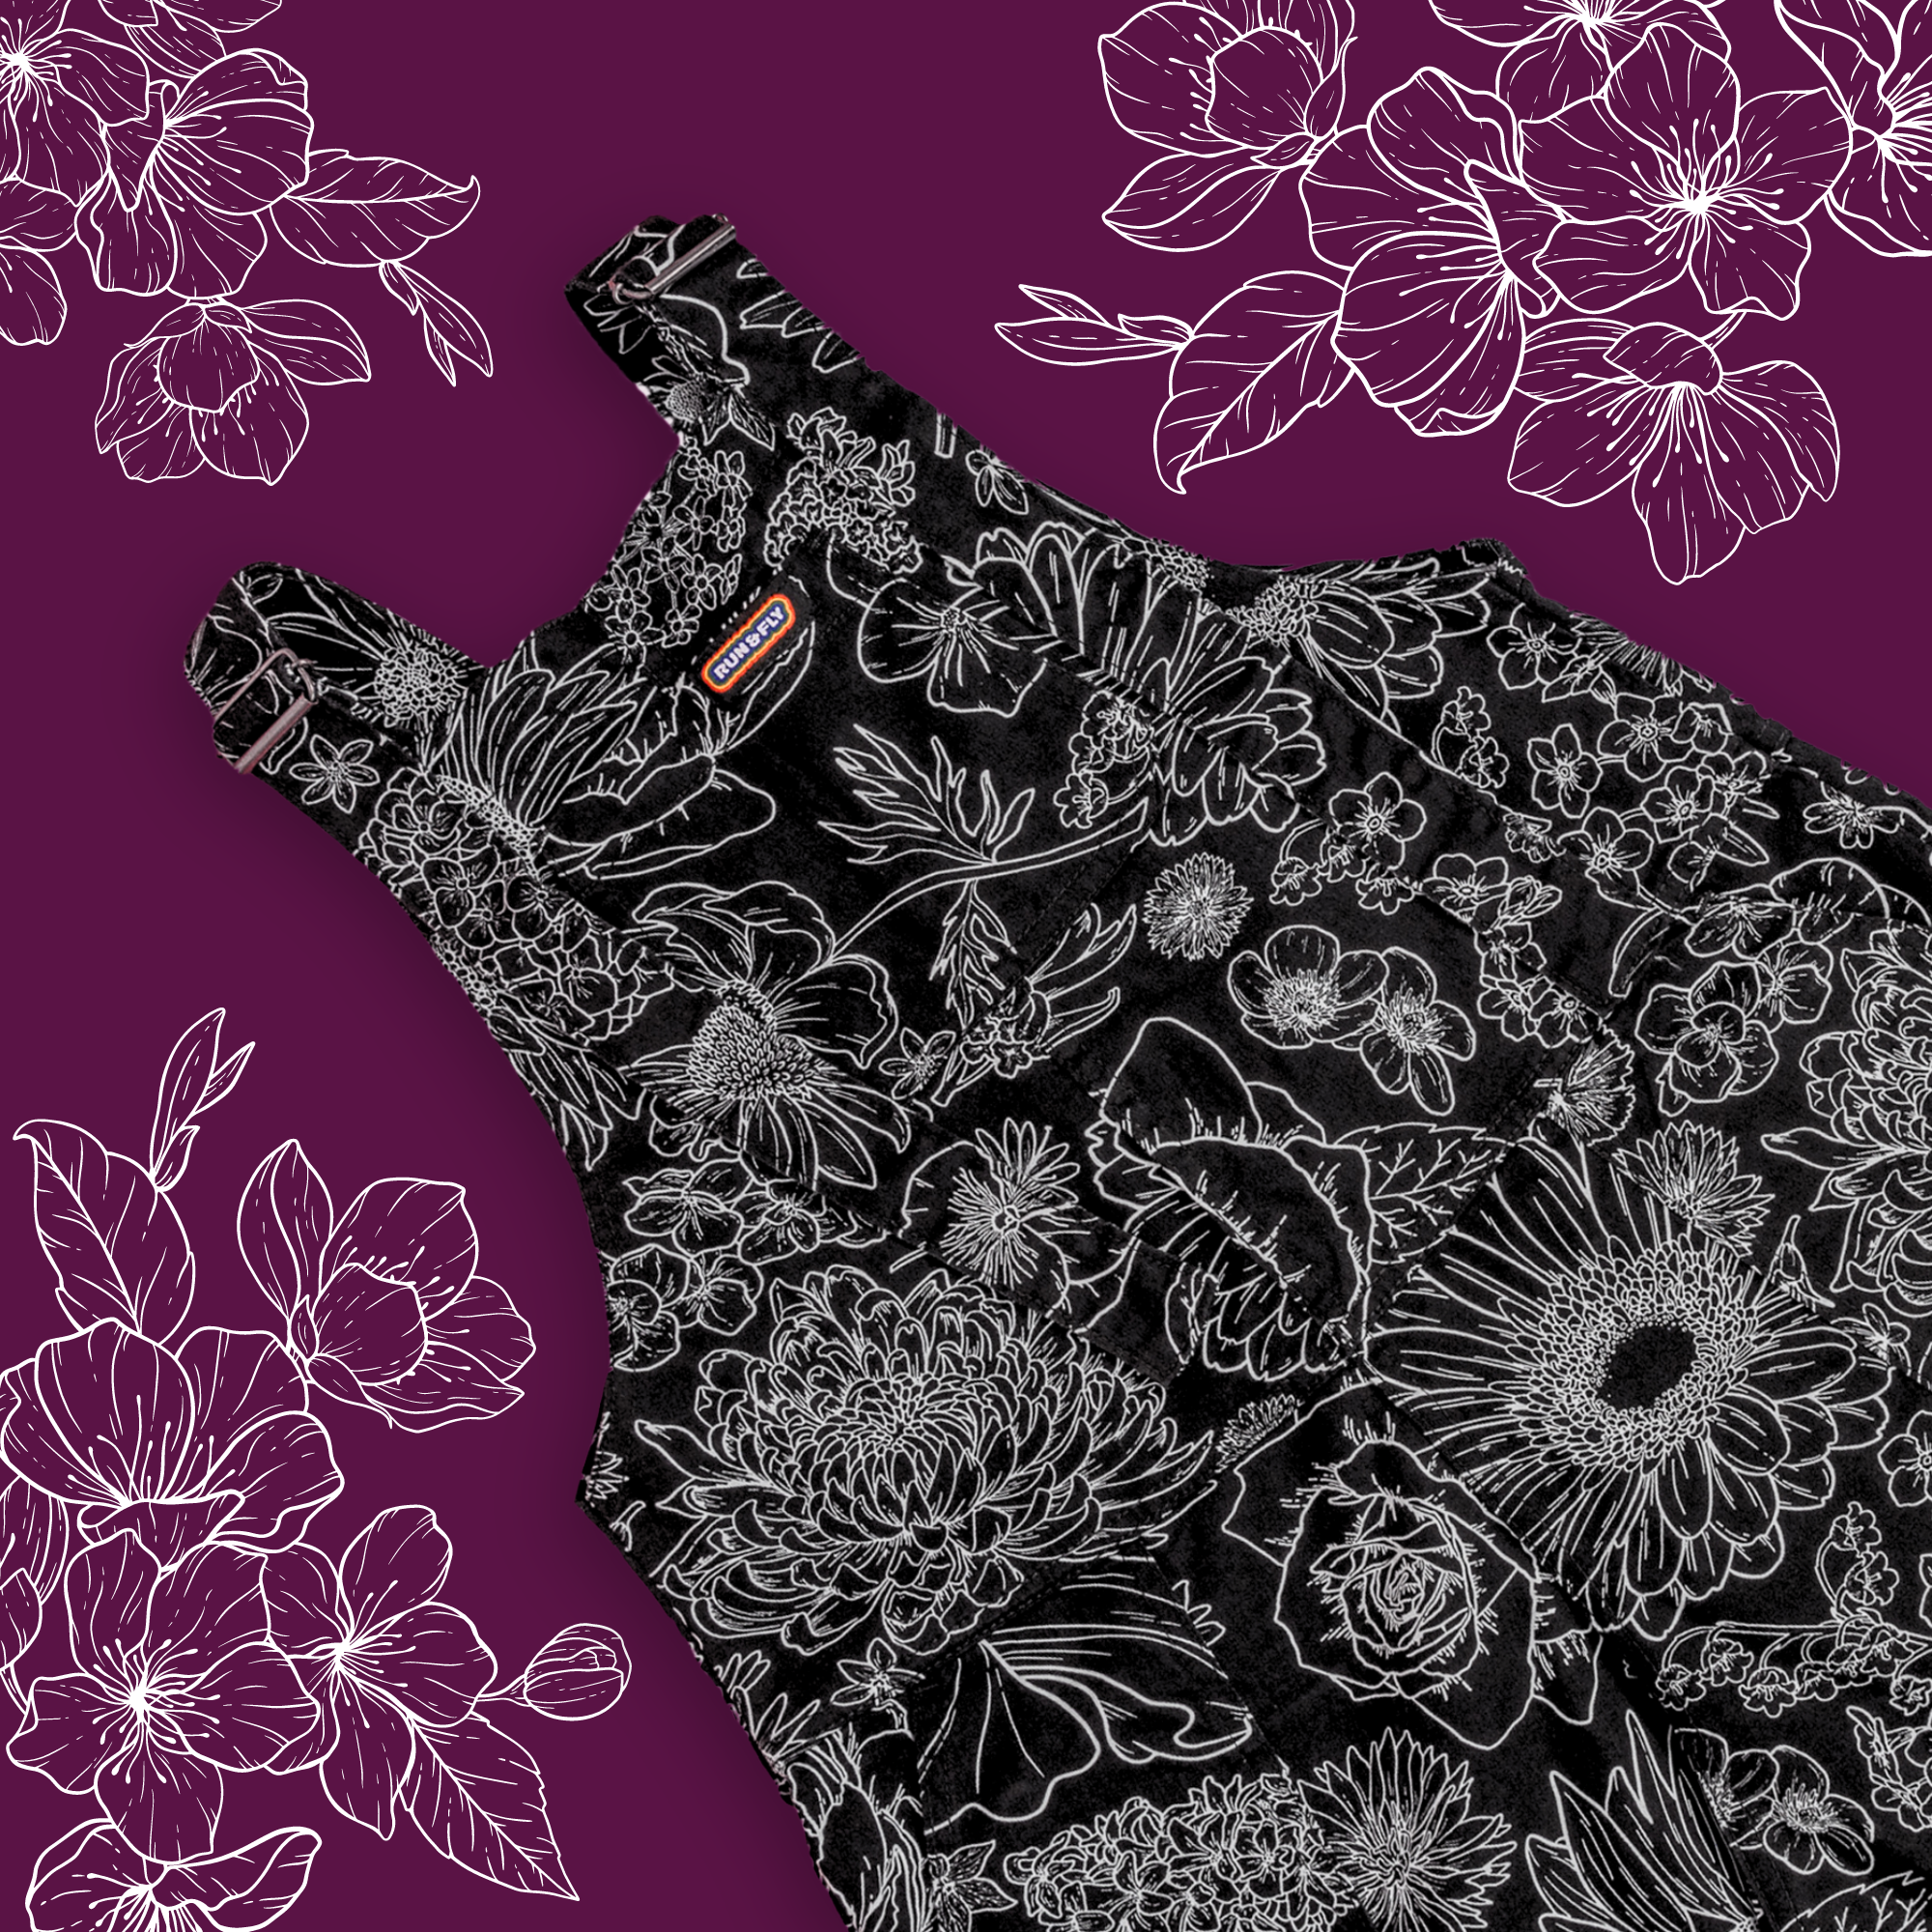 Black floral dungarees laid on a burgundy red background. The ethically made dungarees are a black base with white floral linework all over with retro roller straps and a rainbow run and fly tag sewn to the top of the front bib.